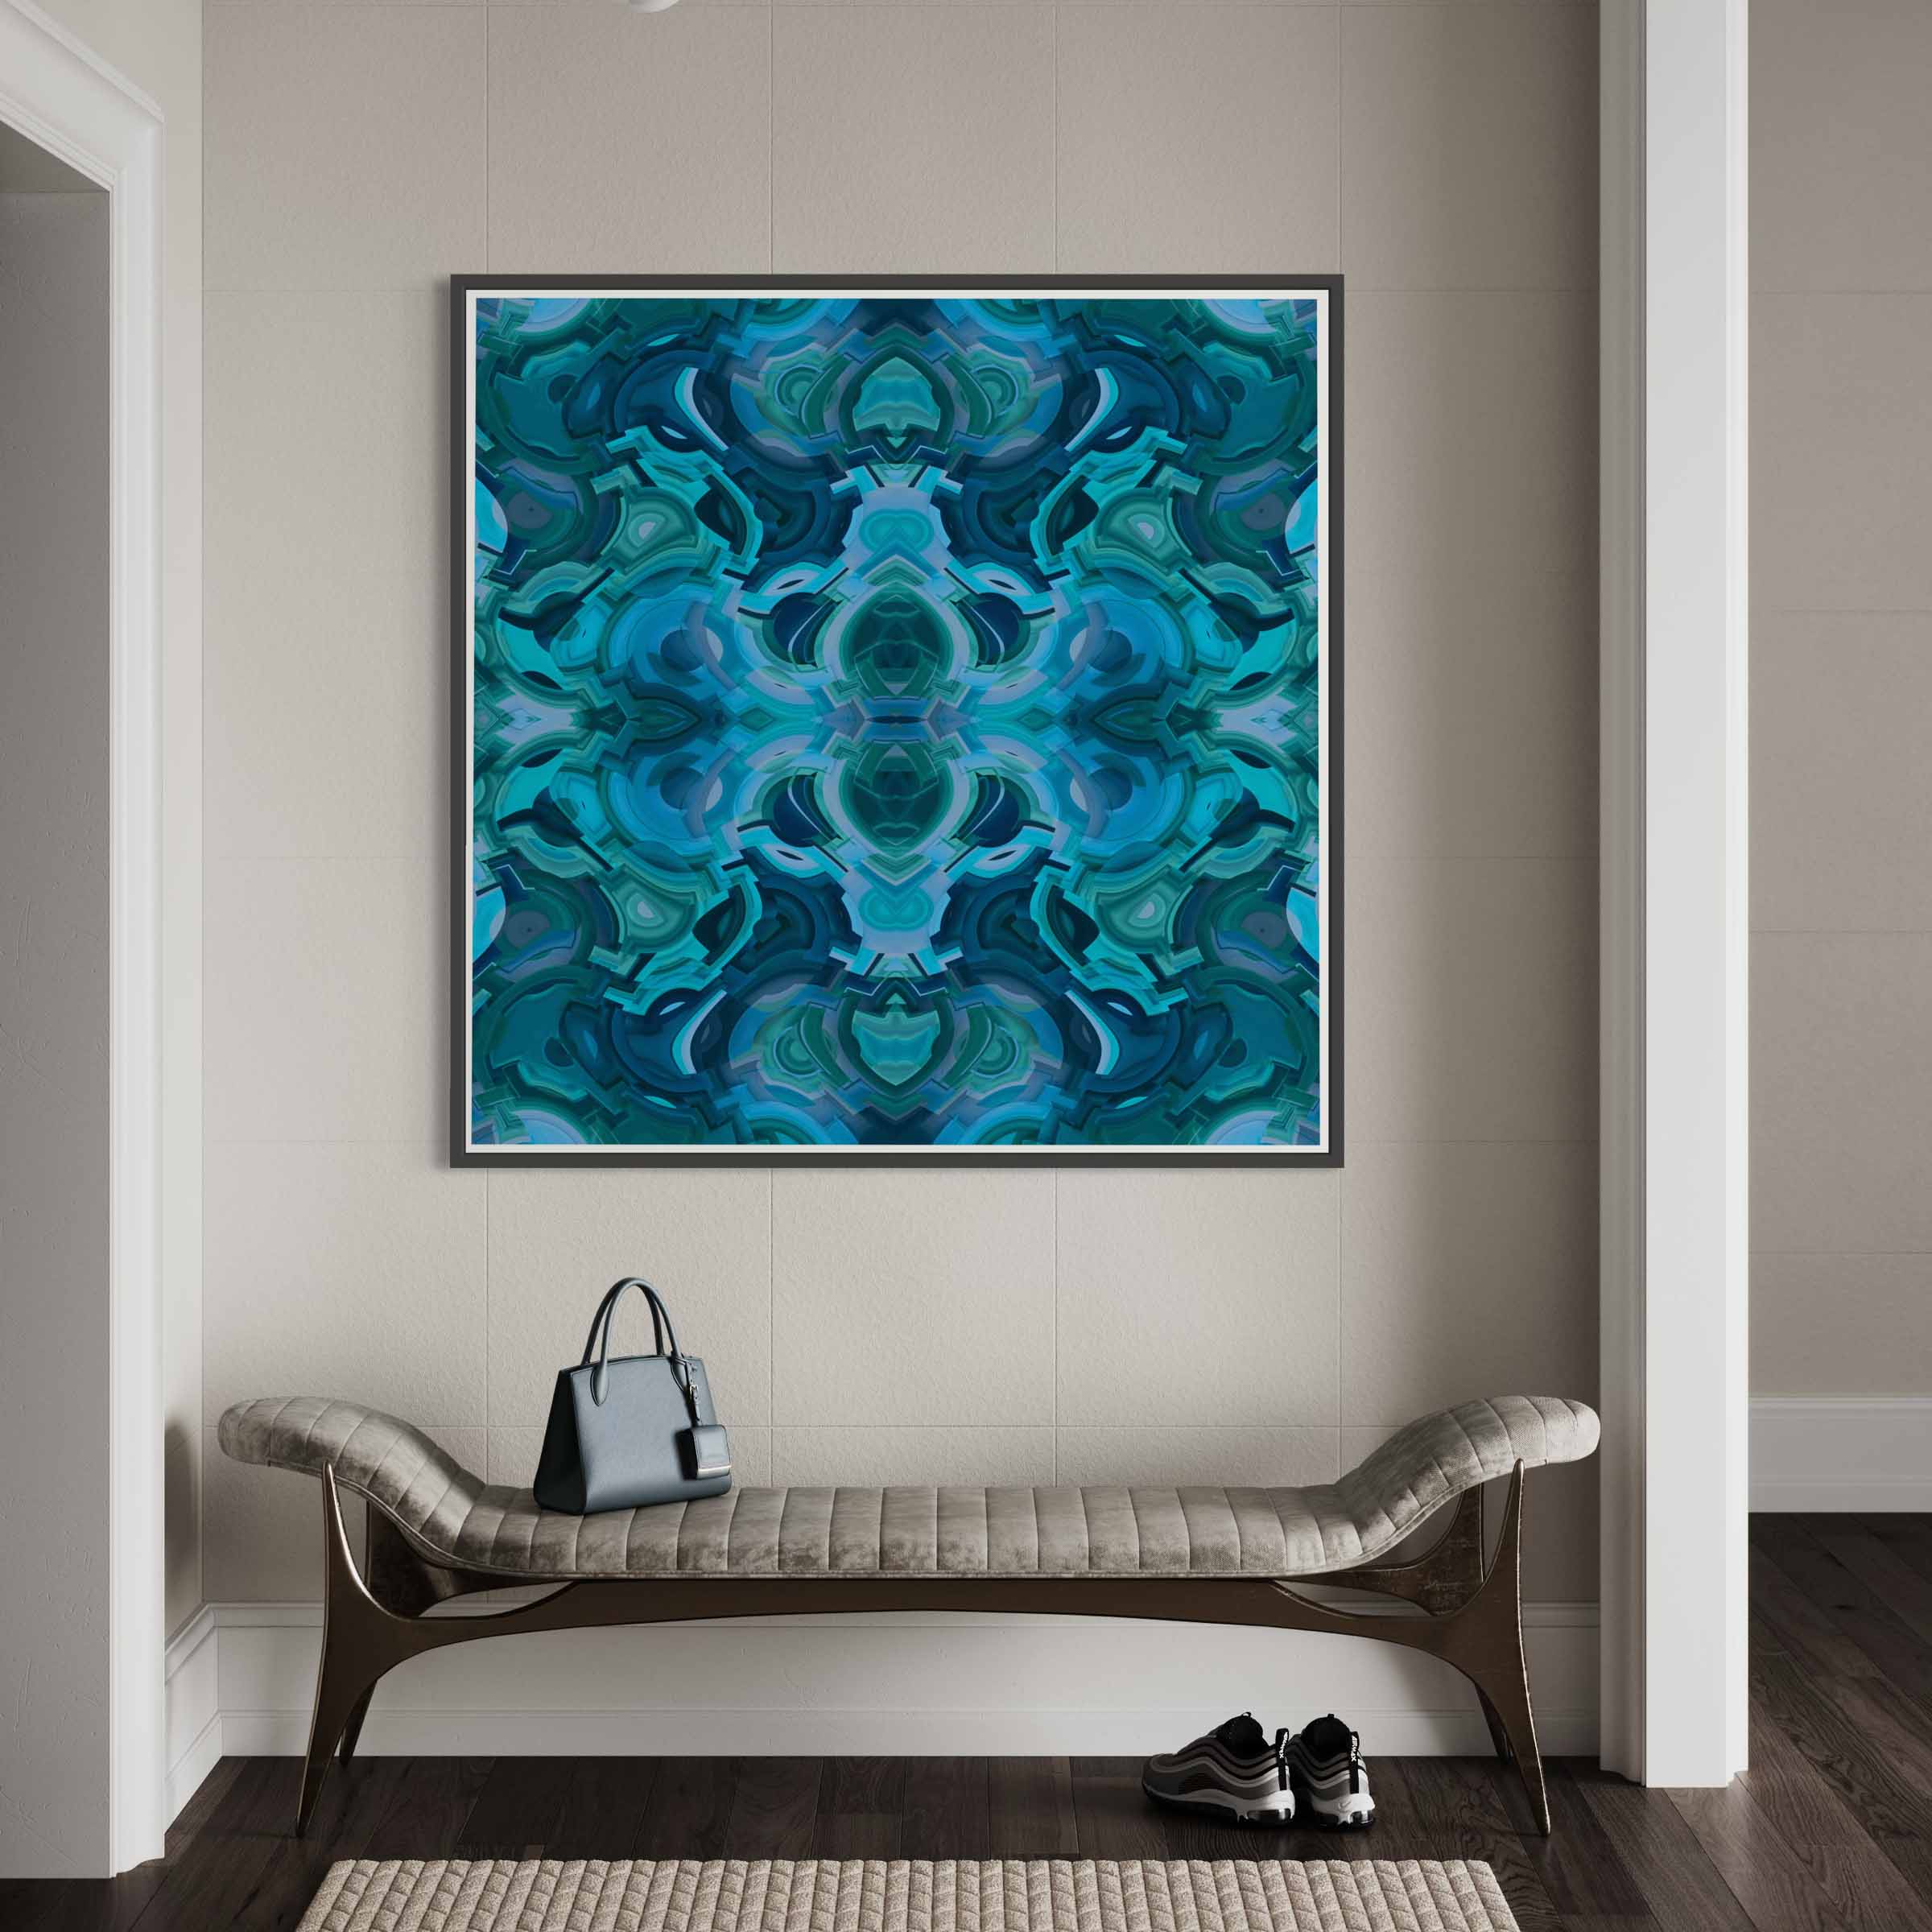 A large blue painting hanging on the wall of a room.